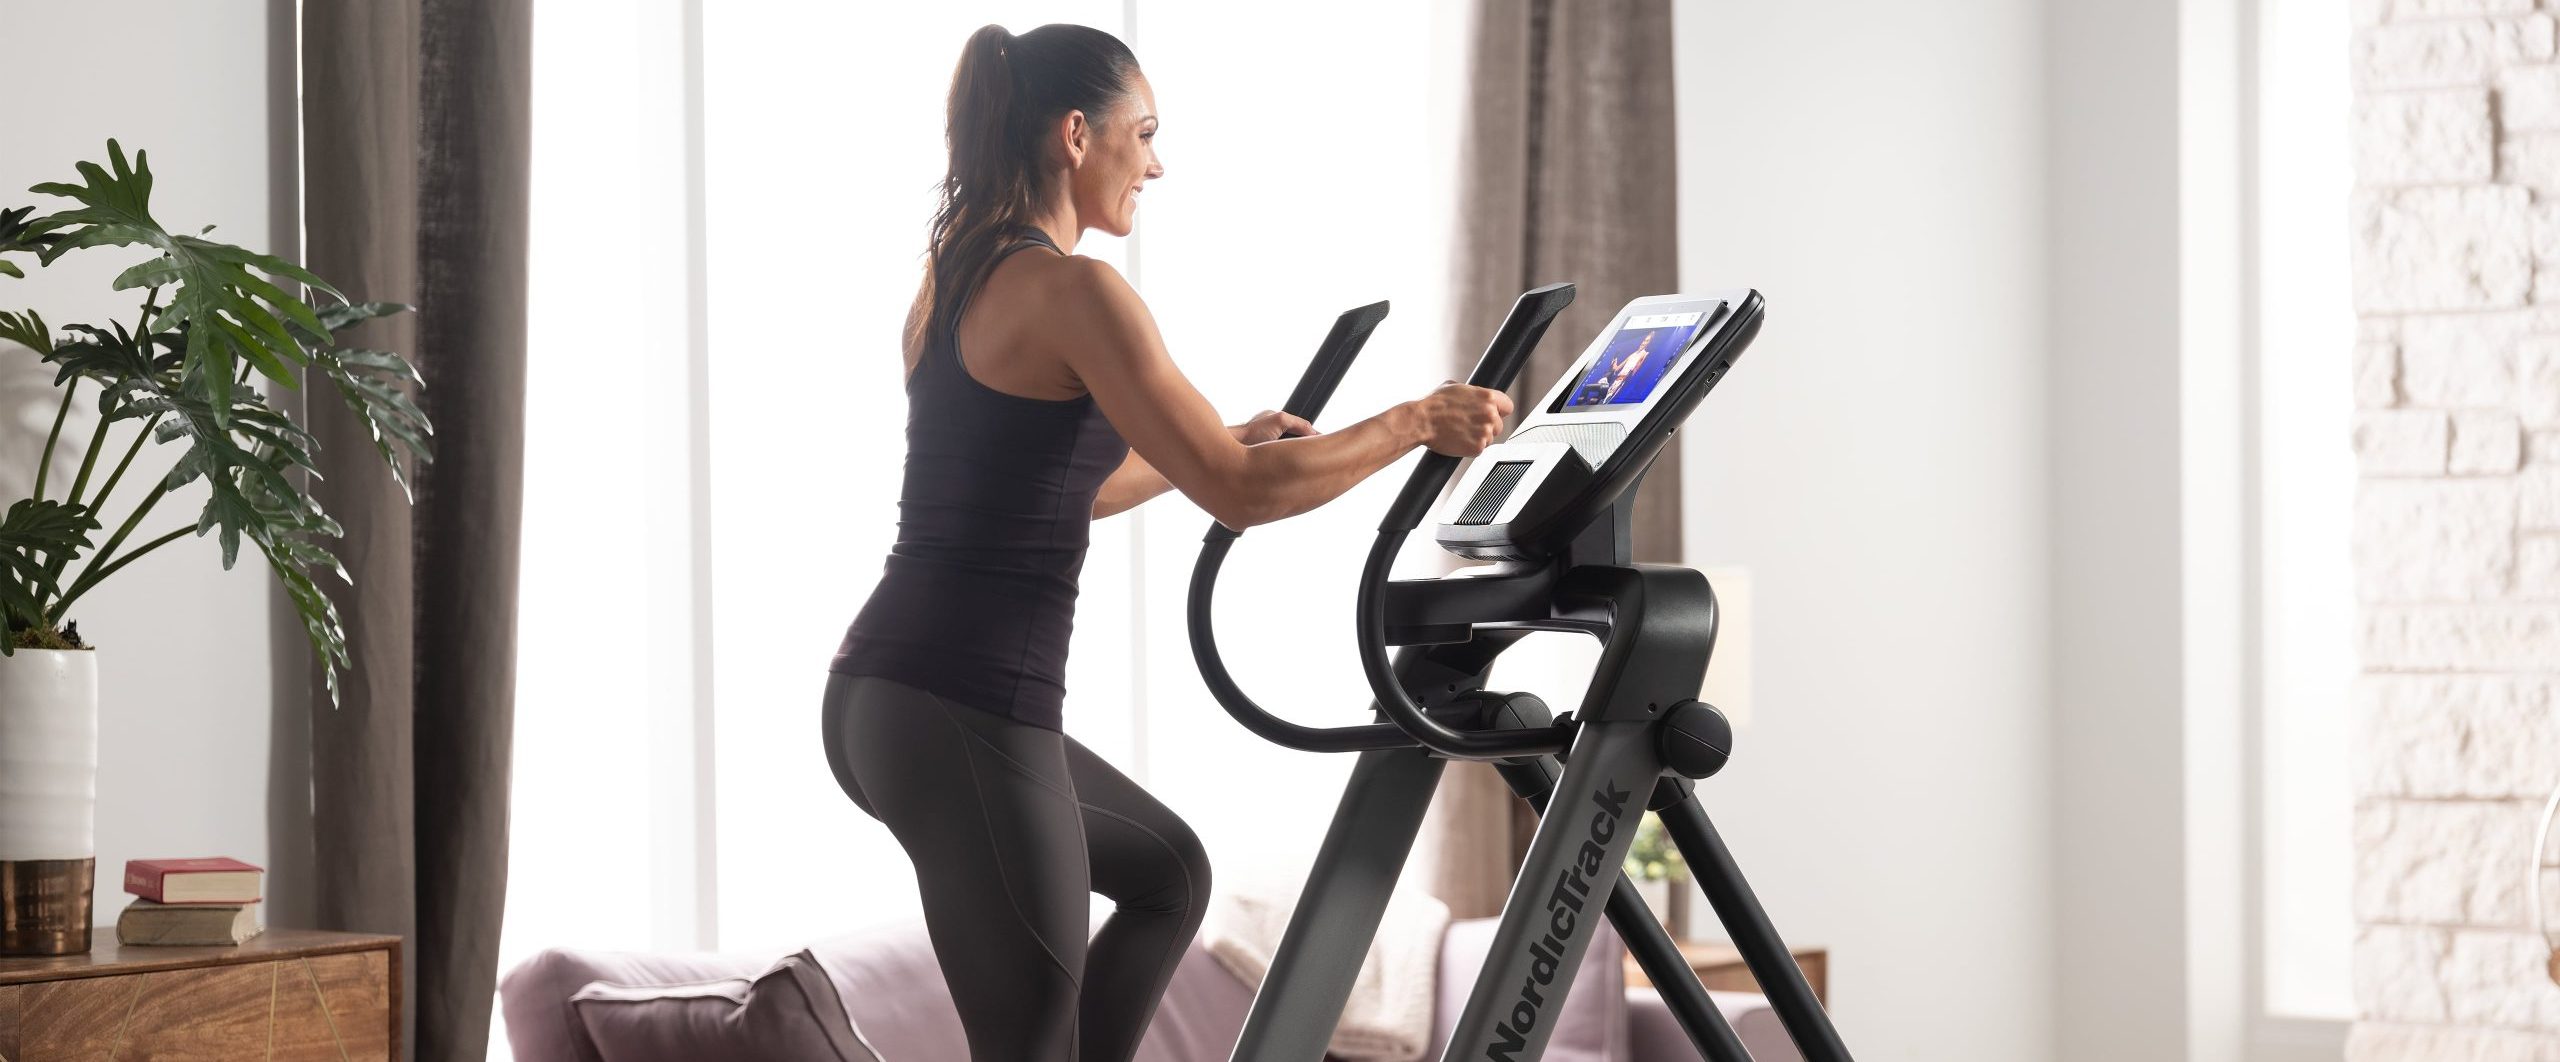 HIIT-cross-trainer-elliptical-fitness-strength-workout-scaled